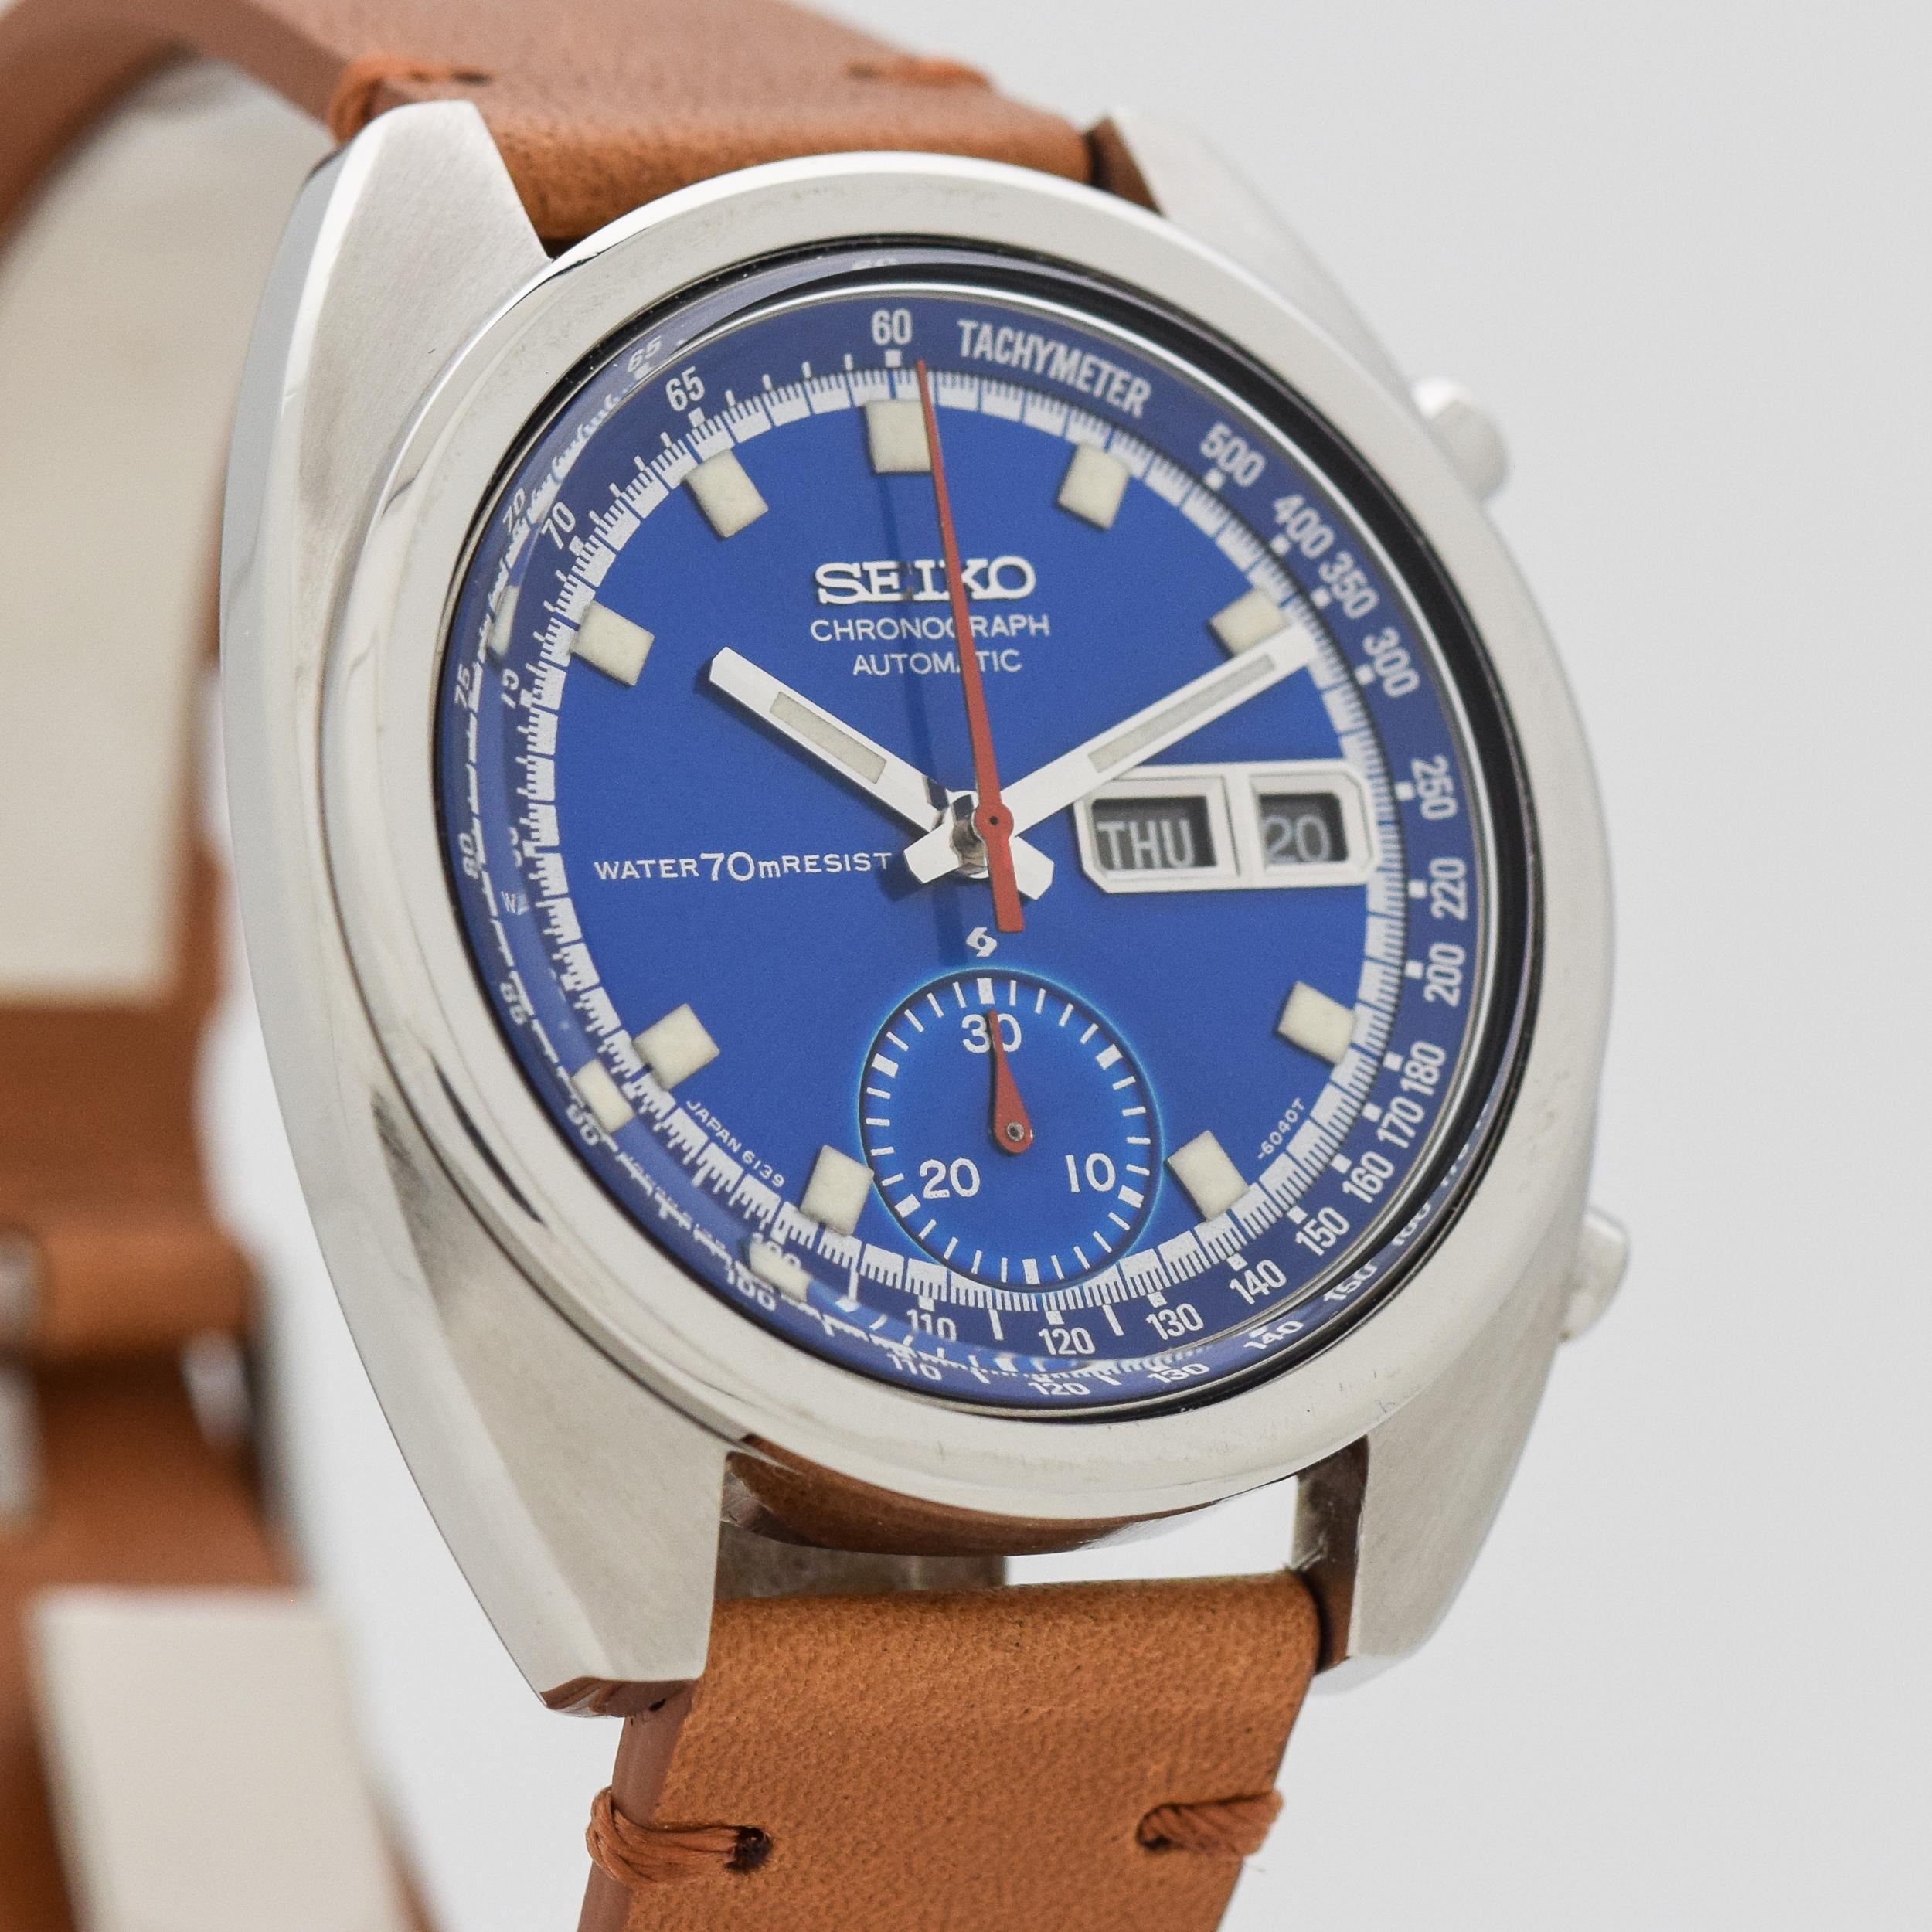 1975 Vintage Seiko Day-Date Automatic Chronograph Ref. 6139-6015 Stainless Steel watch with Original Blue Dial with White Luminous Wide Bar Markers. 40mm x 43mm lug to lug (1.57 in. x 1.69 in.) - 17 jewel, automatic caliber 6139-A movement. Horween